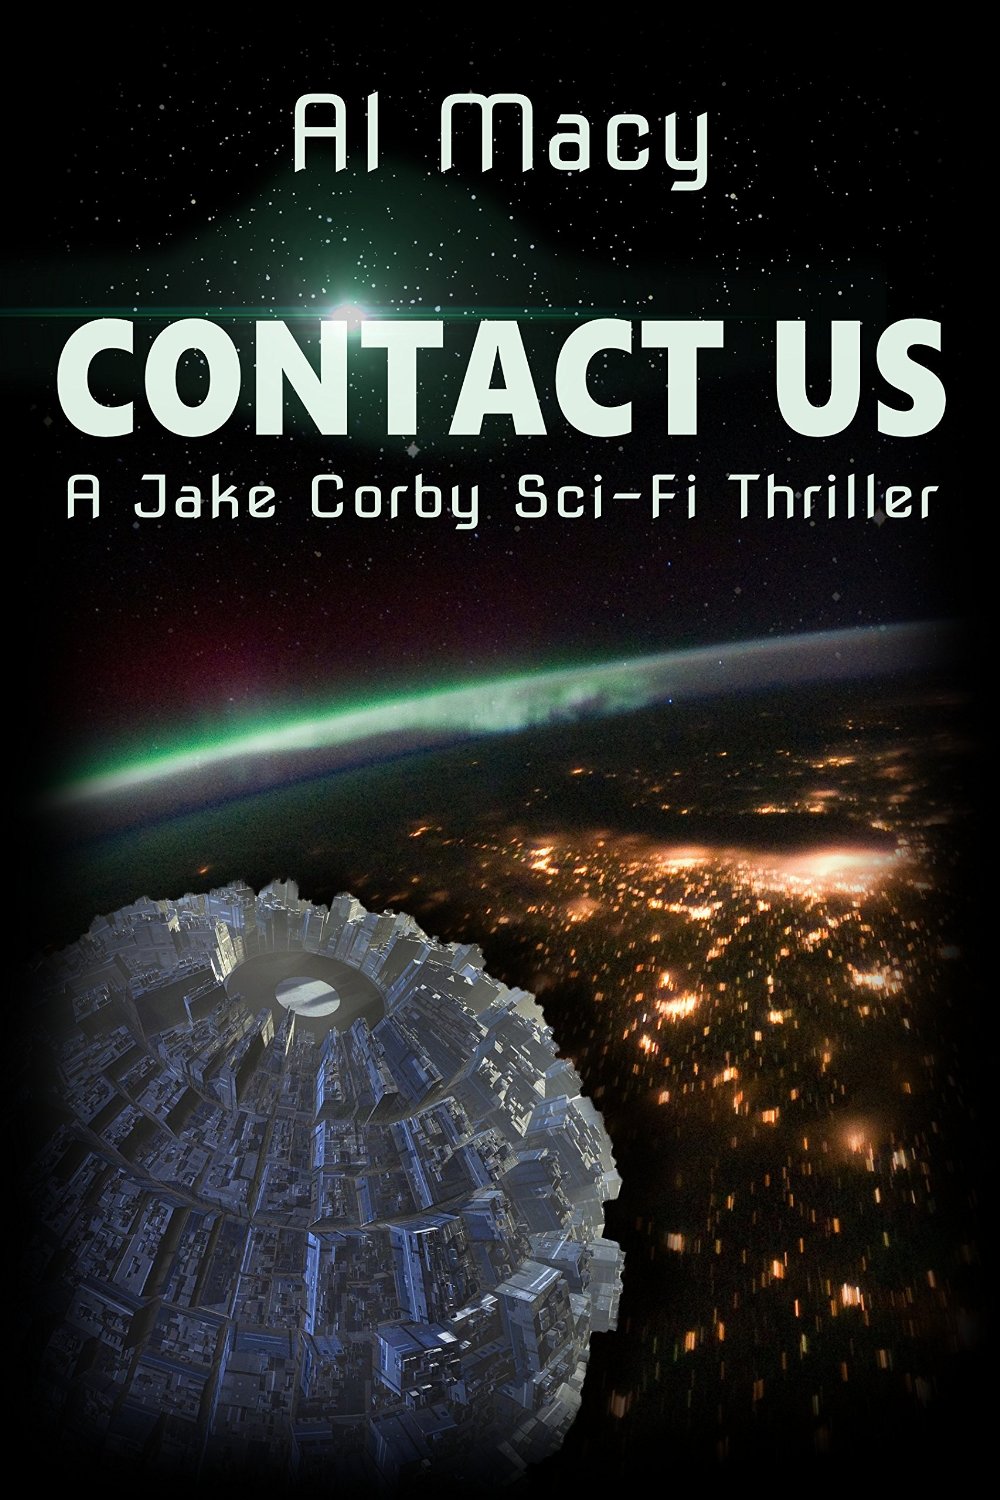 Contact Us: A Jake Corby Sci-Fi Thriller (Mysterious Events Book 1) by Al Macy